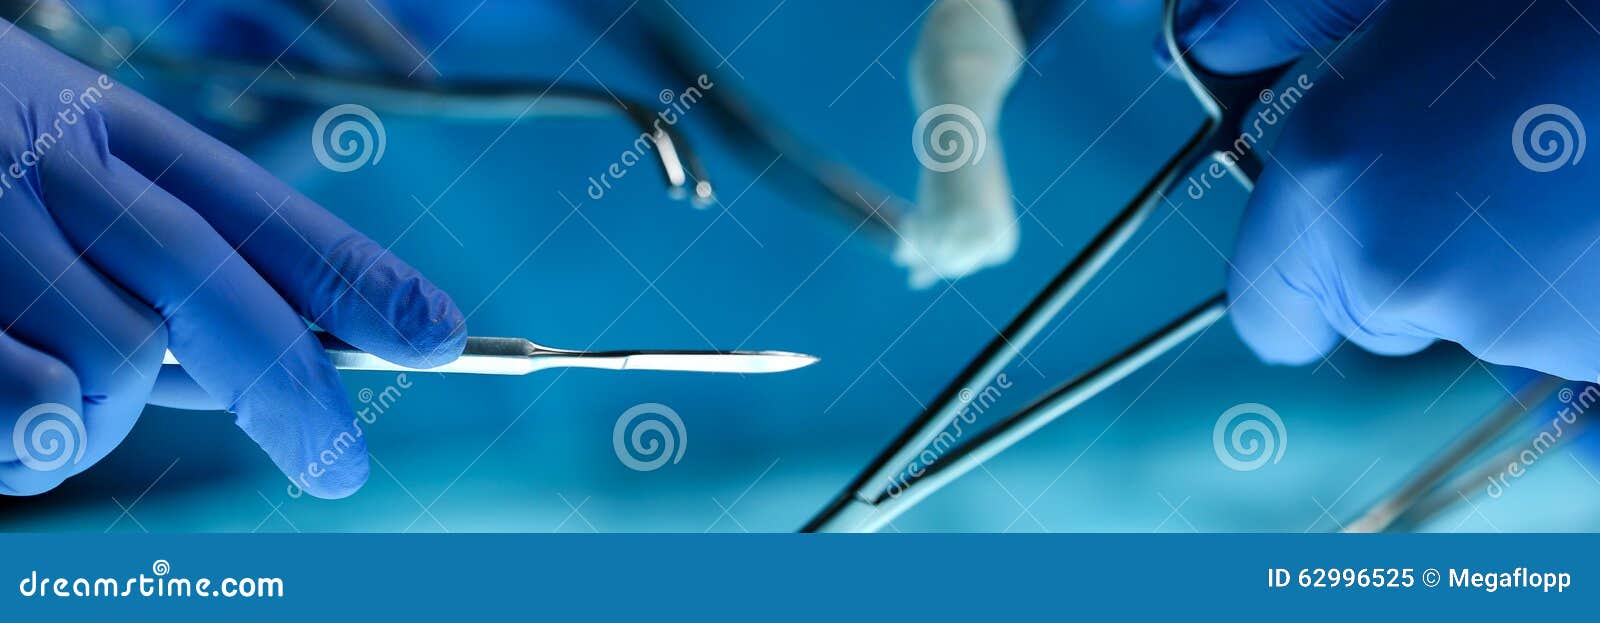 surgeons hands holding surgical instrument